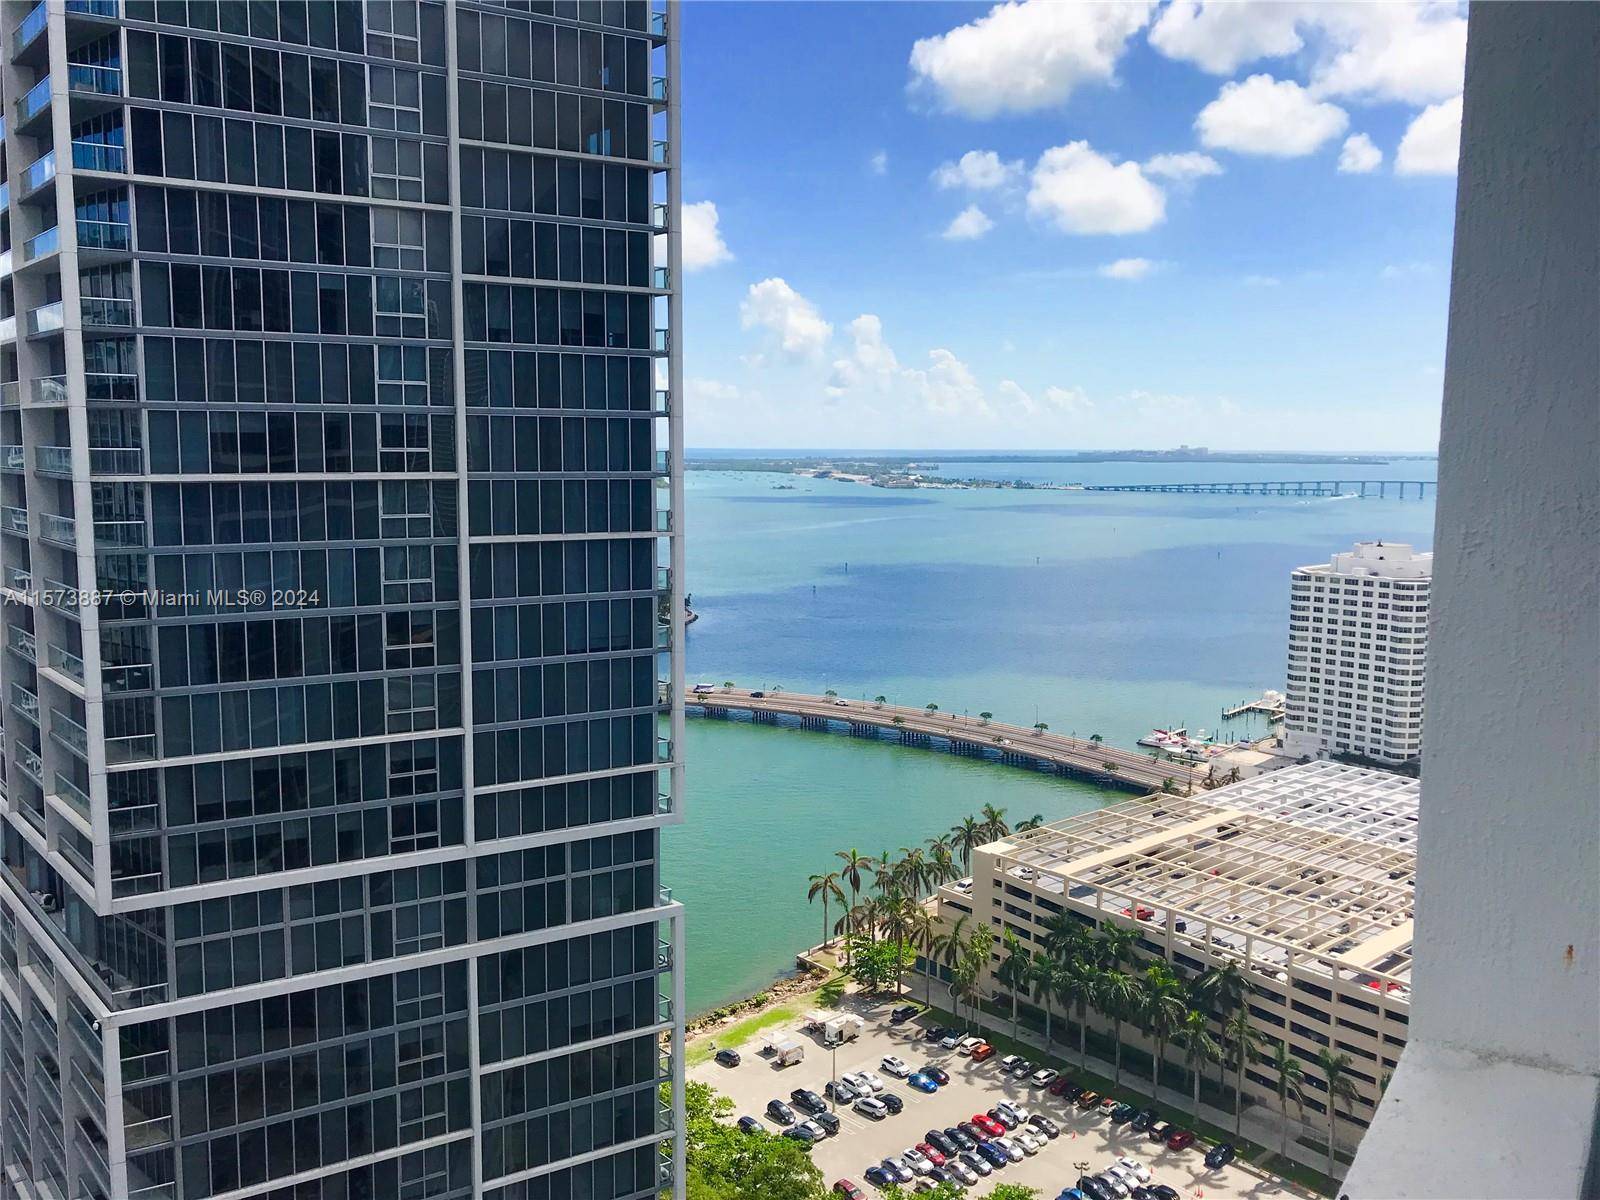 BEAUTIFUL 1 1 UNIT IN THE HEART OF BRICKELL WITH WHITE CERAMIC FLOORS, STAINLESS STEEL APPLIANCESAND AMAZING VIEWS OF THE POOL, BISCAYNE BAY AND MIAMI RIVER.